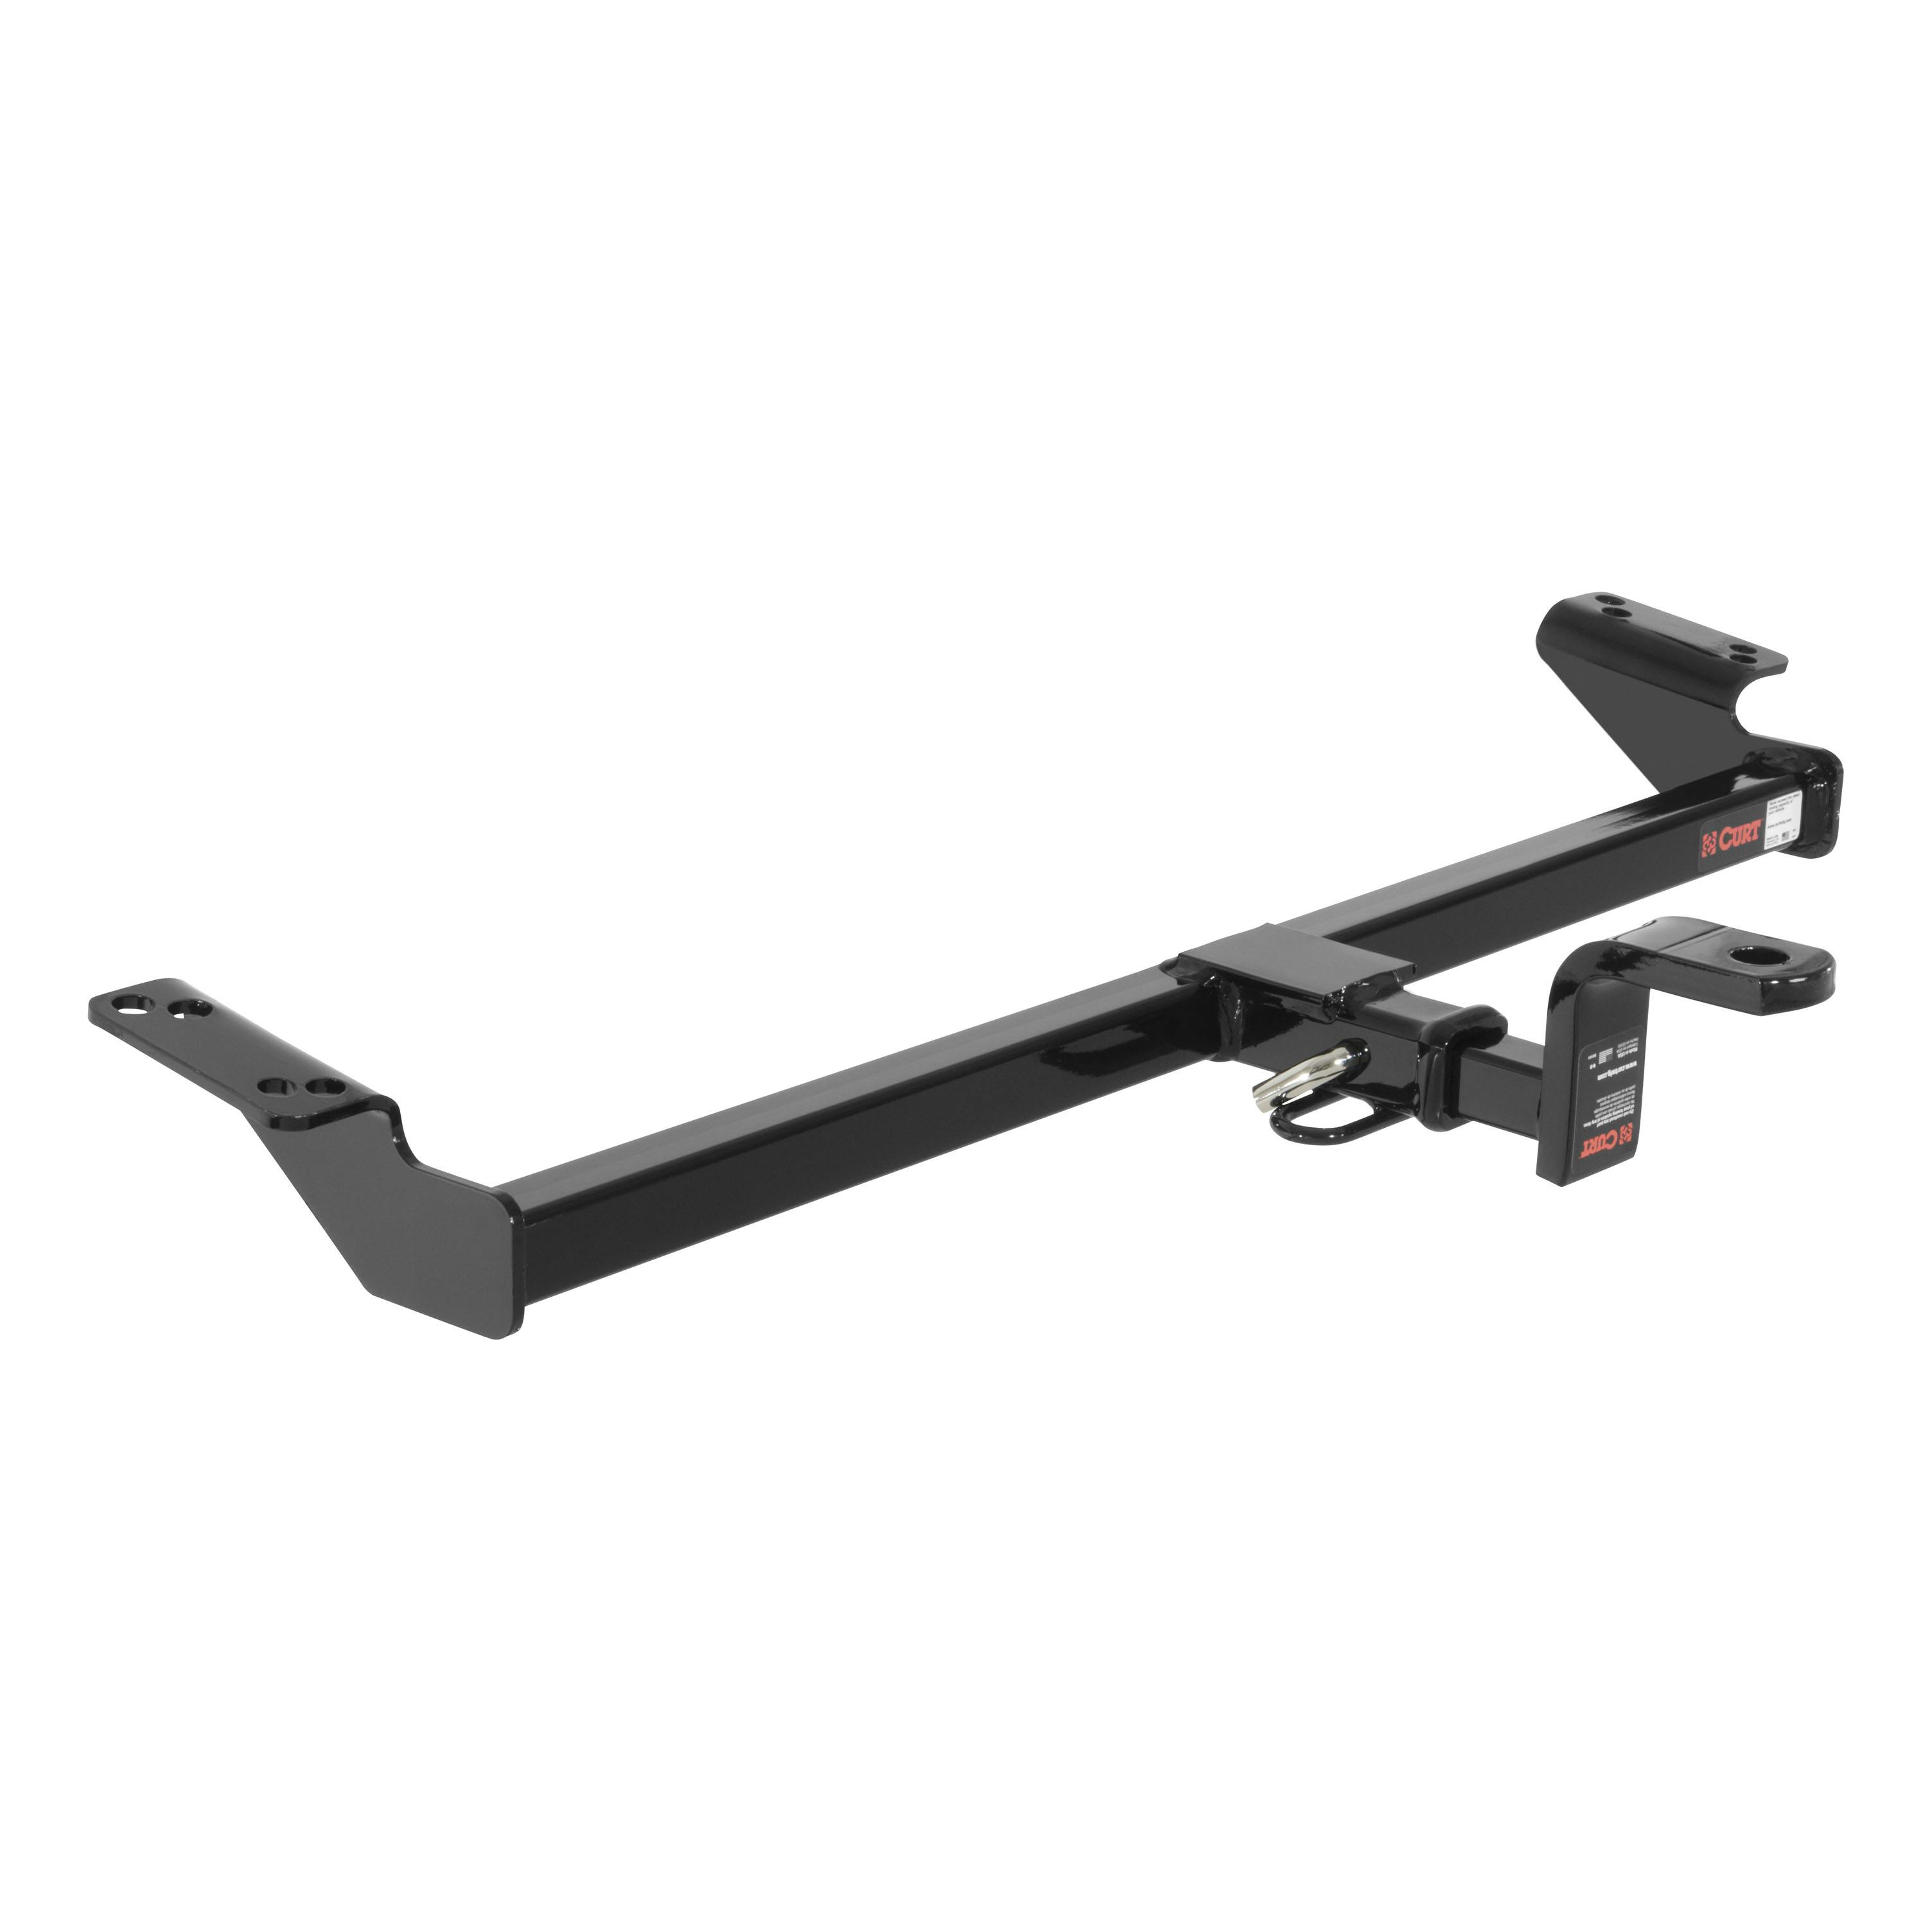 Curt Manufacturing CURT 111413 CLASS 1 Trailer Hitch With 1-1/4 & Ball Mount With 3/4 Trailer Ball for 96-05 Toyota Rav4 